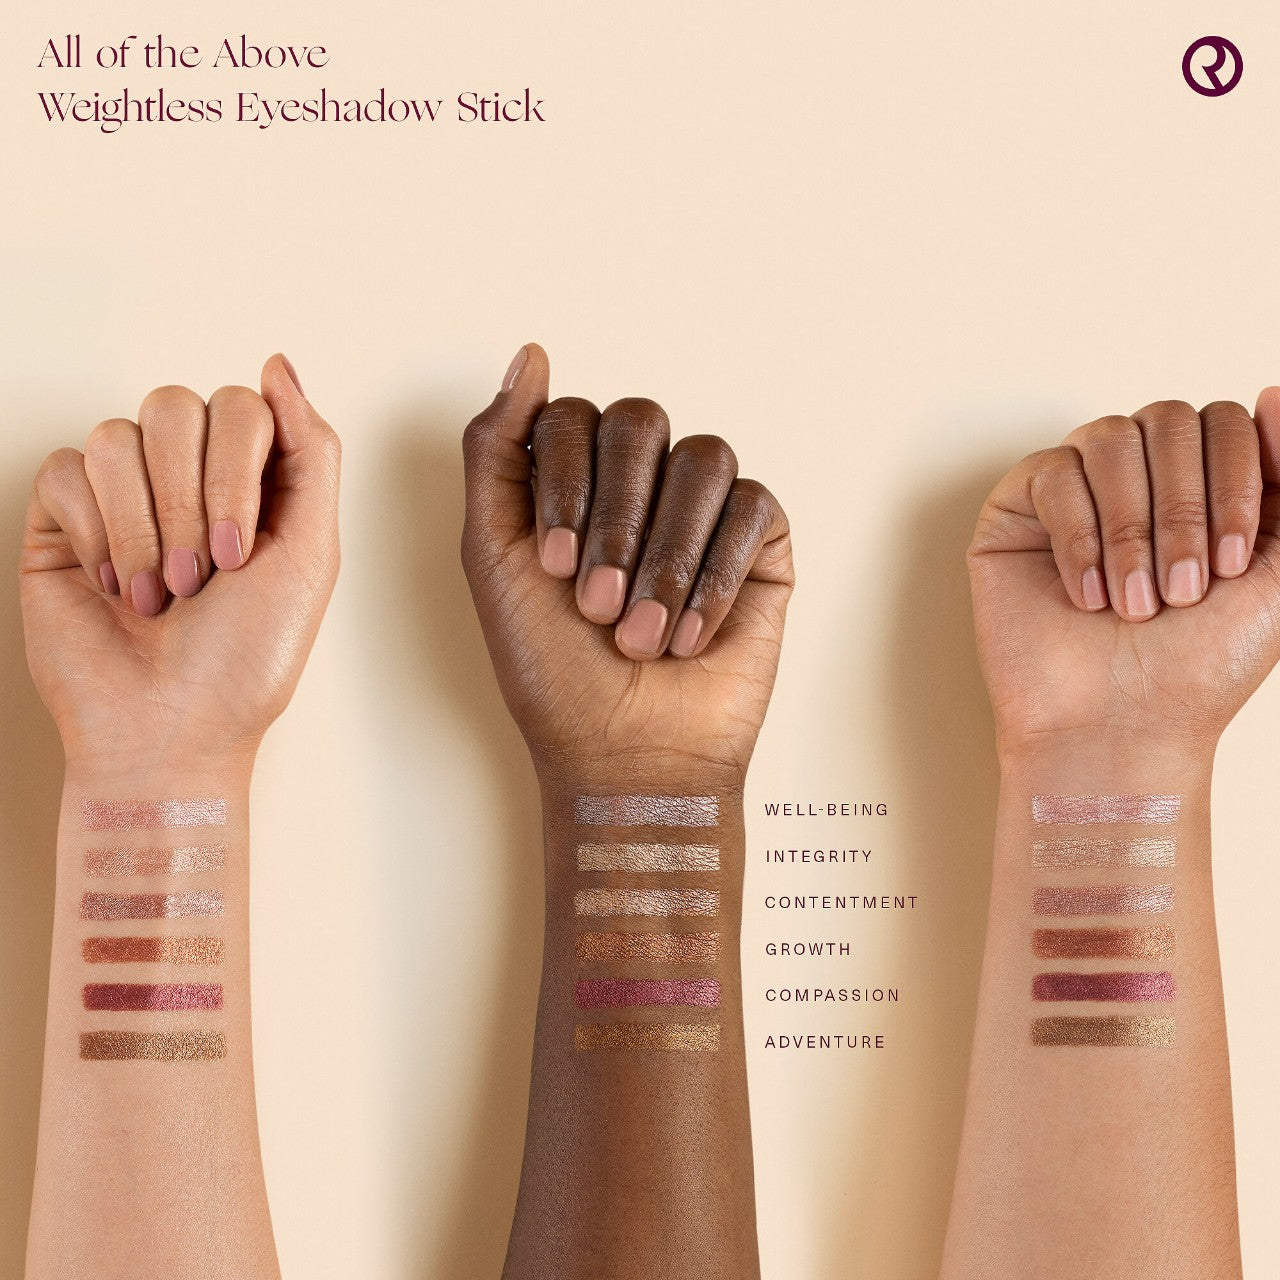 All Of The Above Weightless Eyeshadow Stick - Compassion